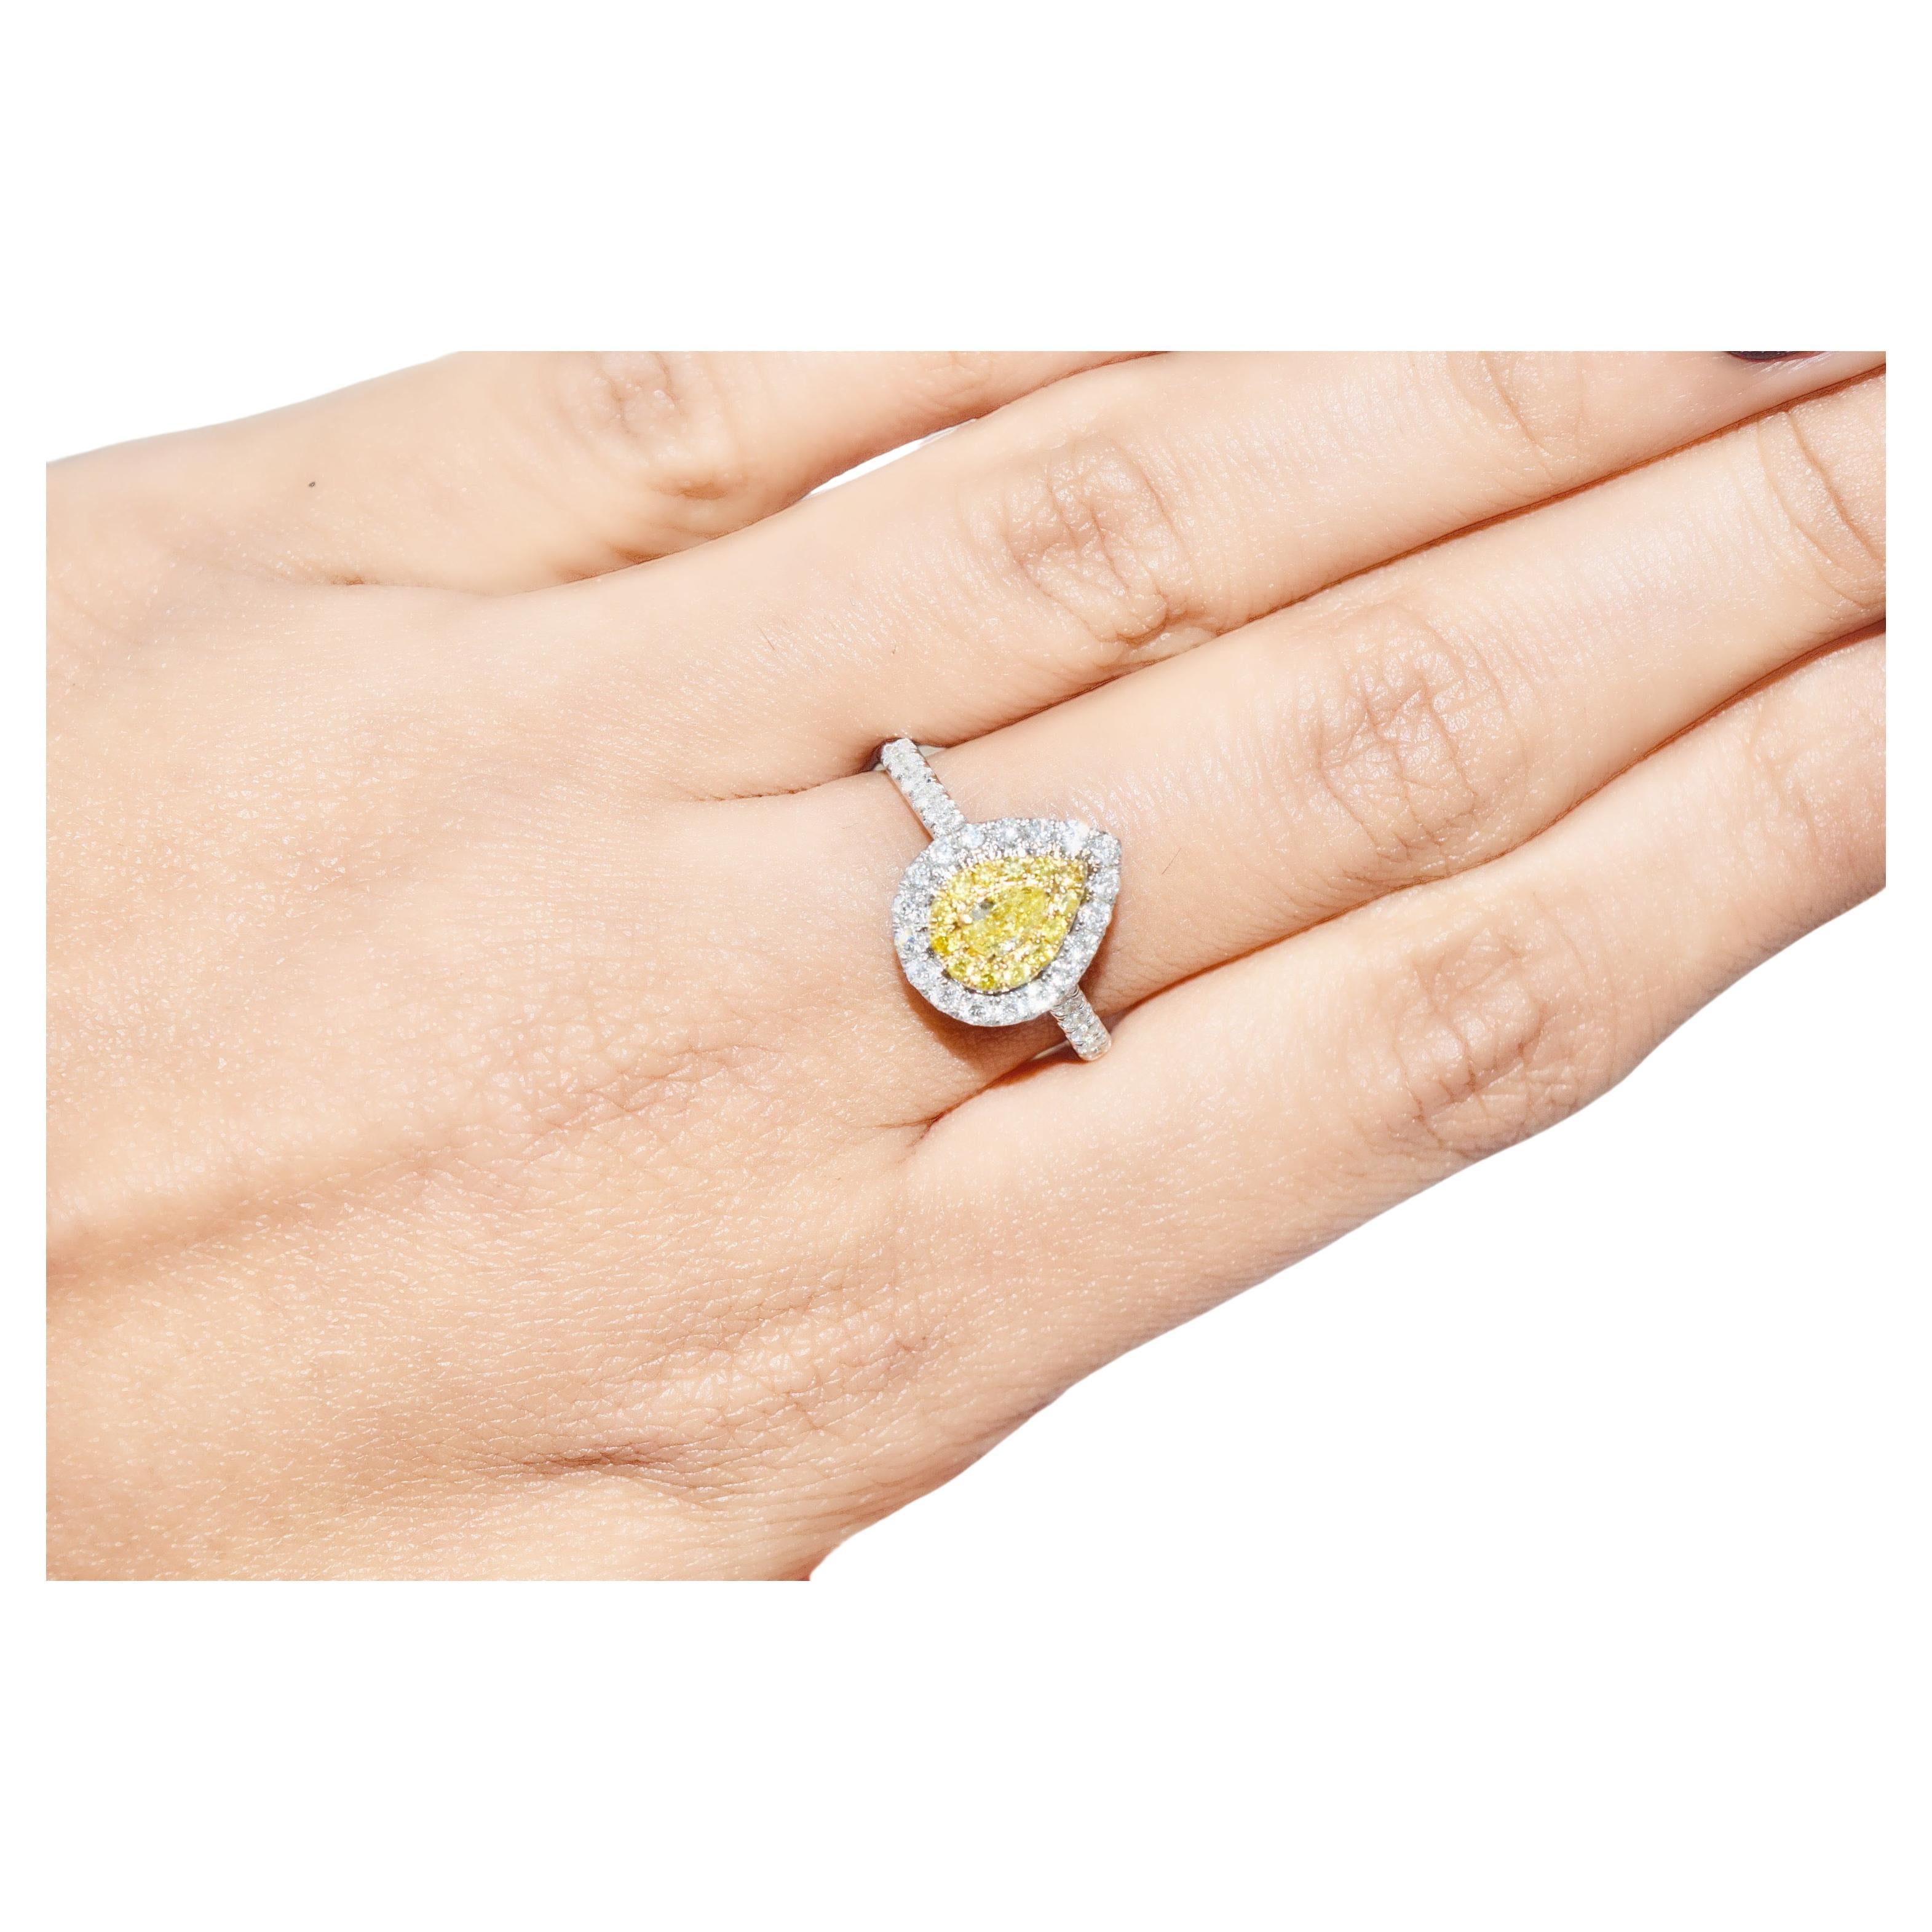 AGL Certified 0.17 Carat Fancy Yellow Diamond Ring SI Clarity For Sale